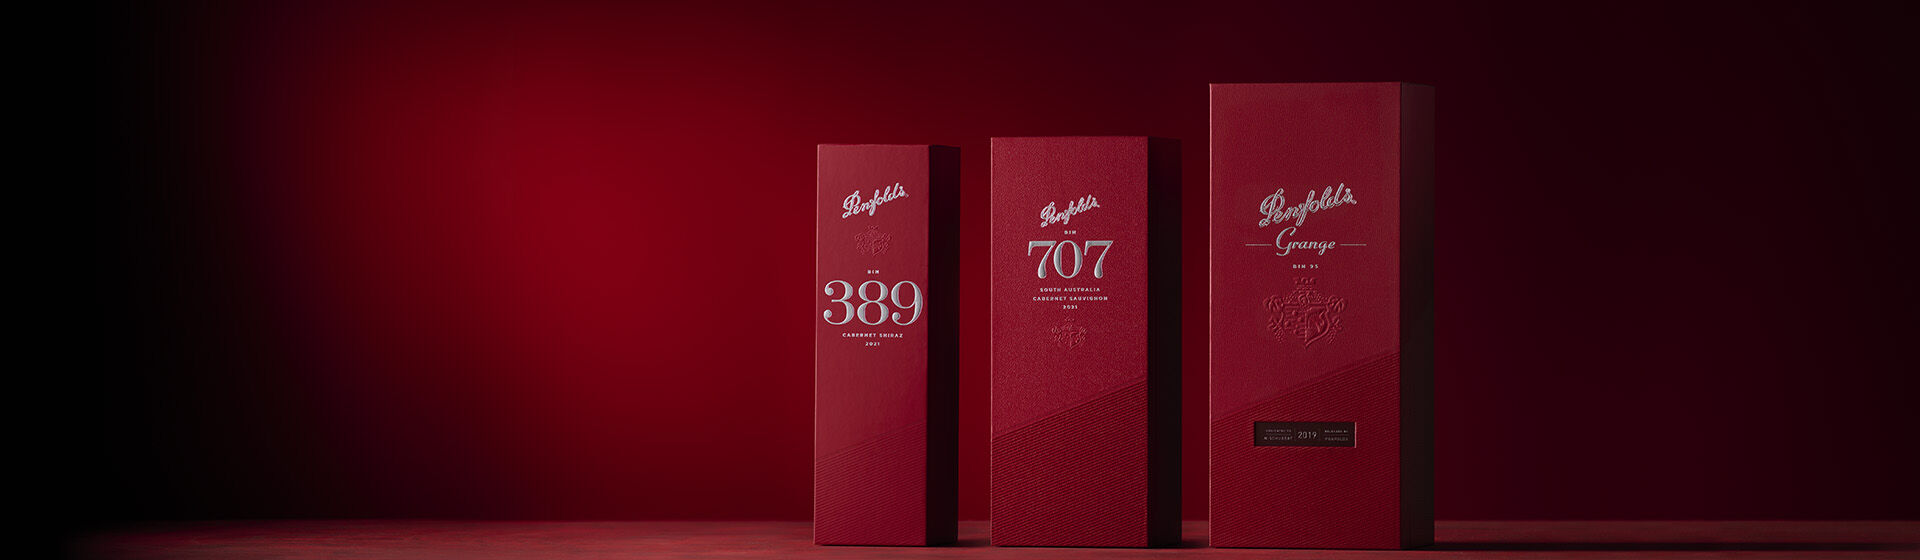 Penfolds Bin 389, Bin 707 and Grange giftboxes lined up